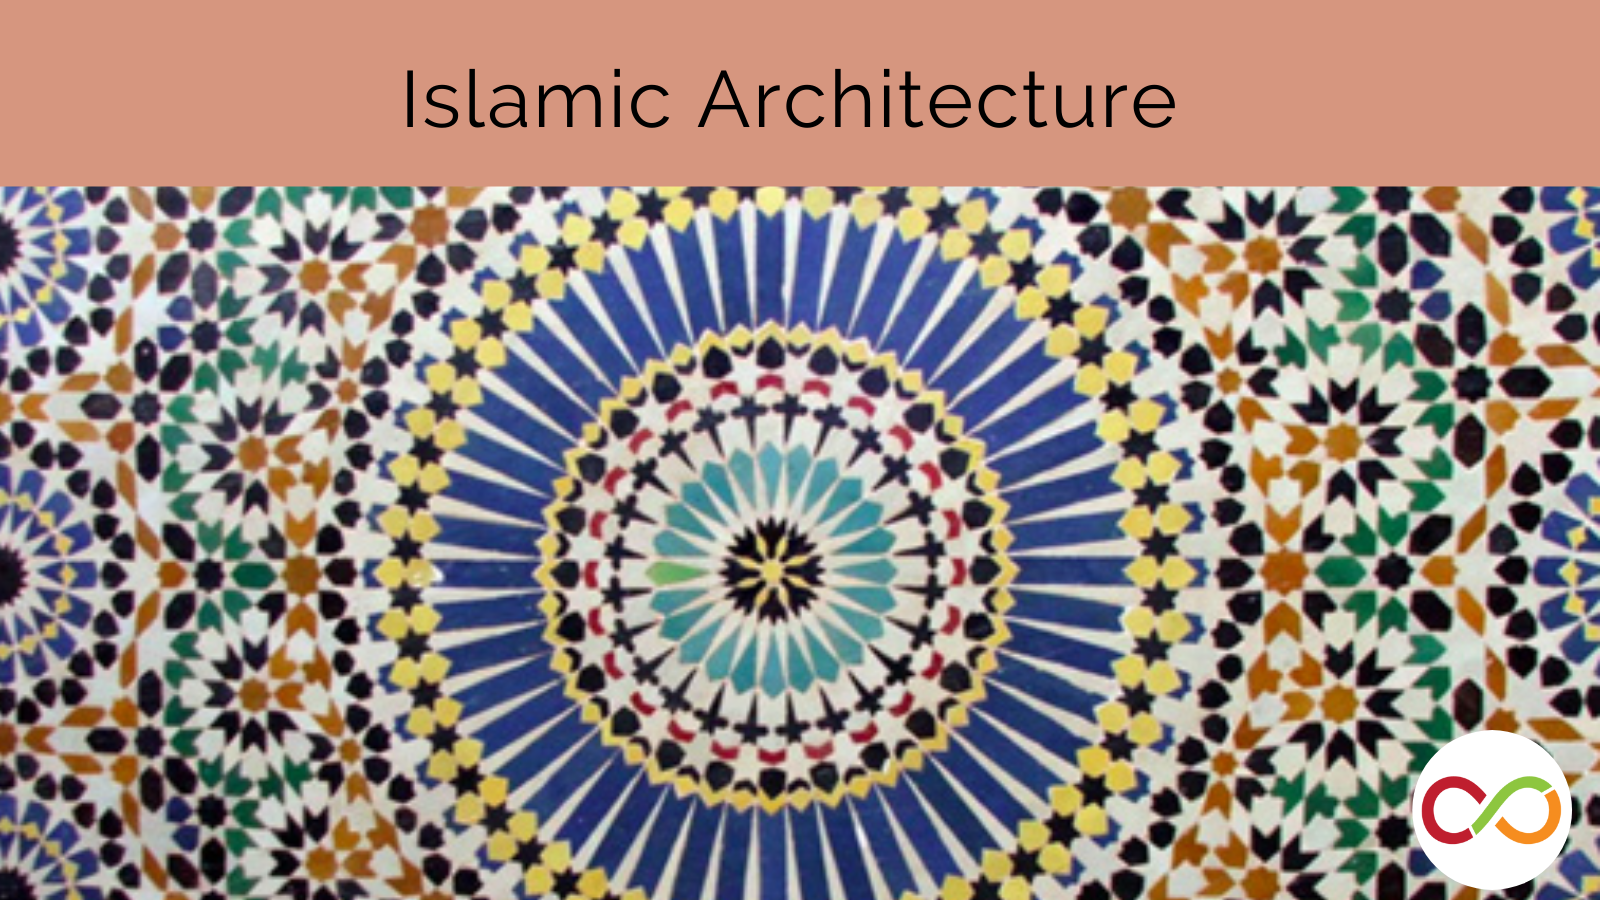 An image linking to the Islamic Architecture lesson